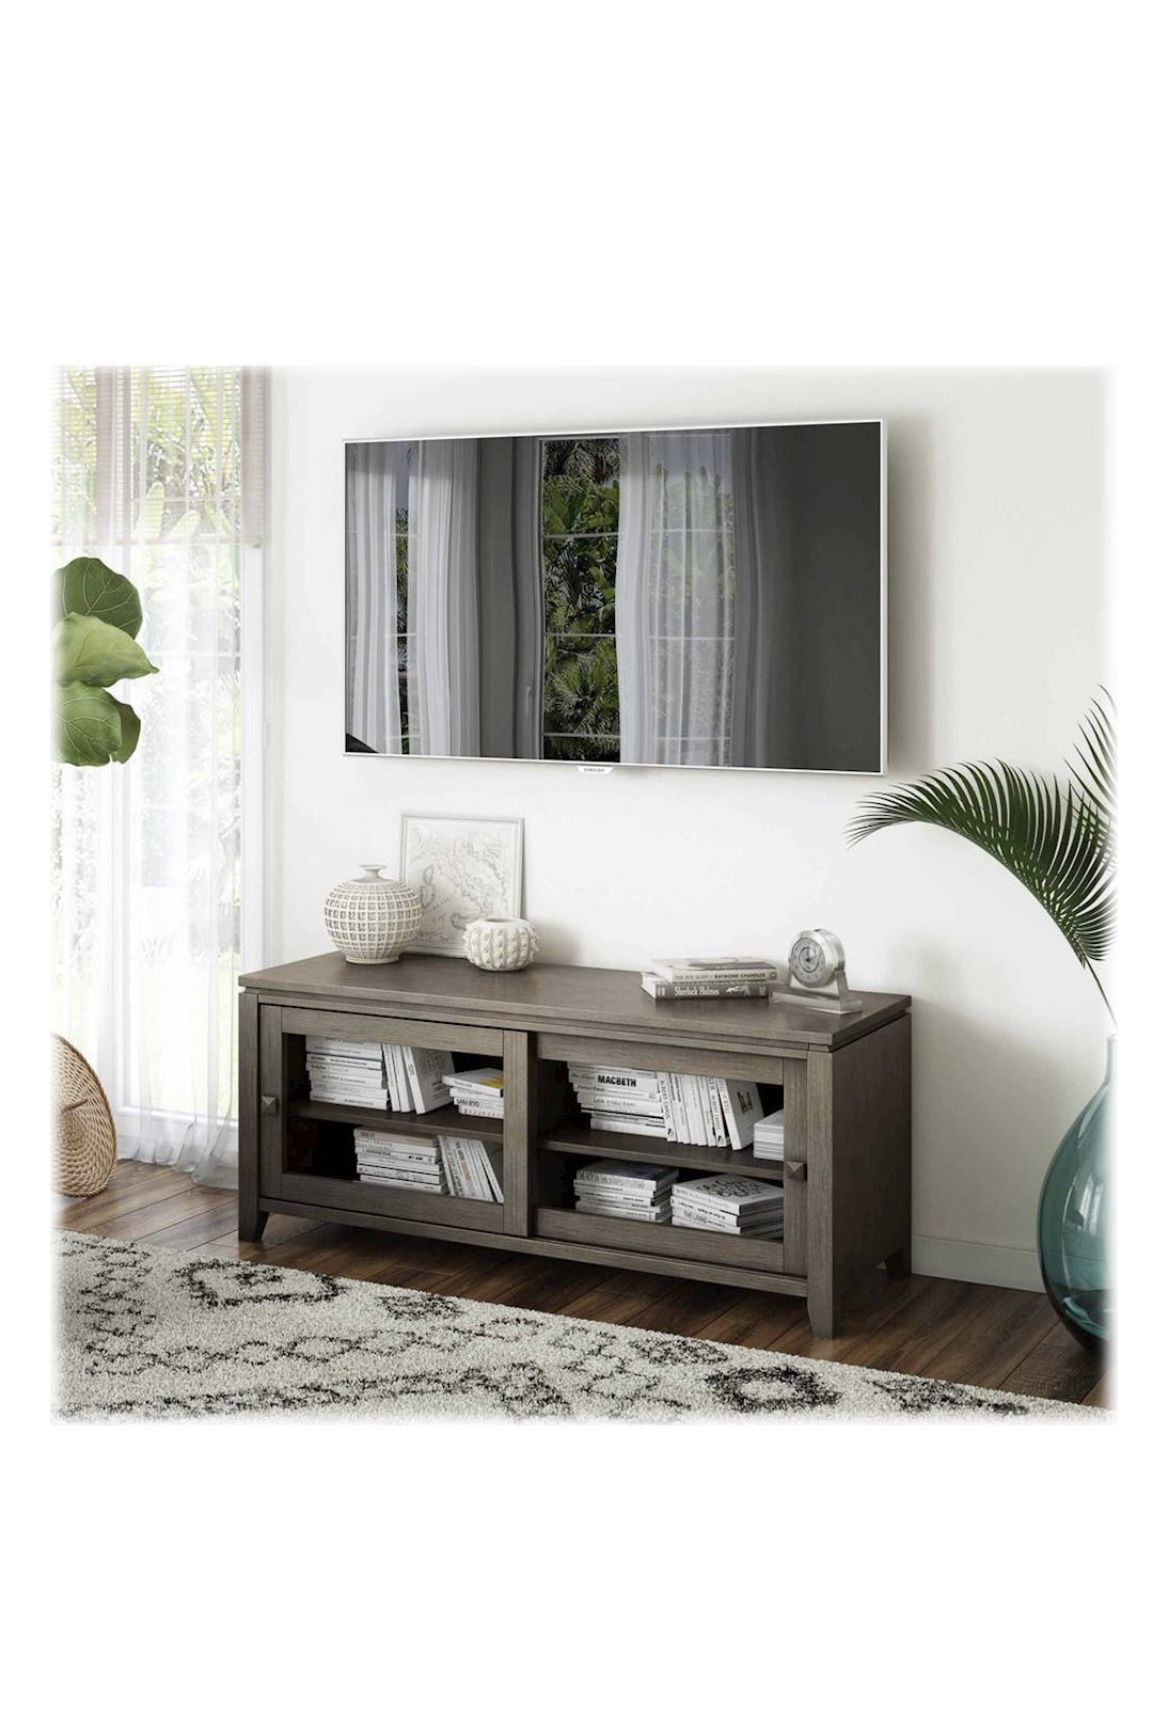 Simpli Home - Cosmopolitan Contemporary TV Media Stand for Most TVs Up to 50" - Farmhouse Gray